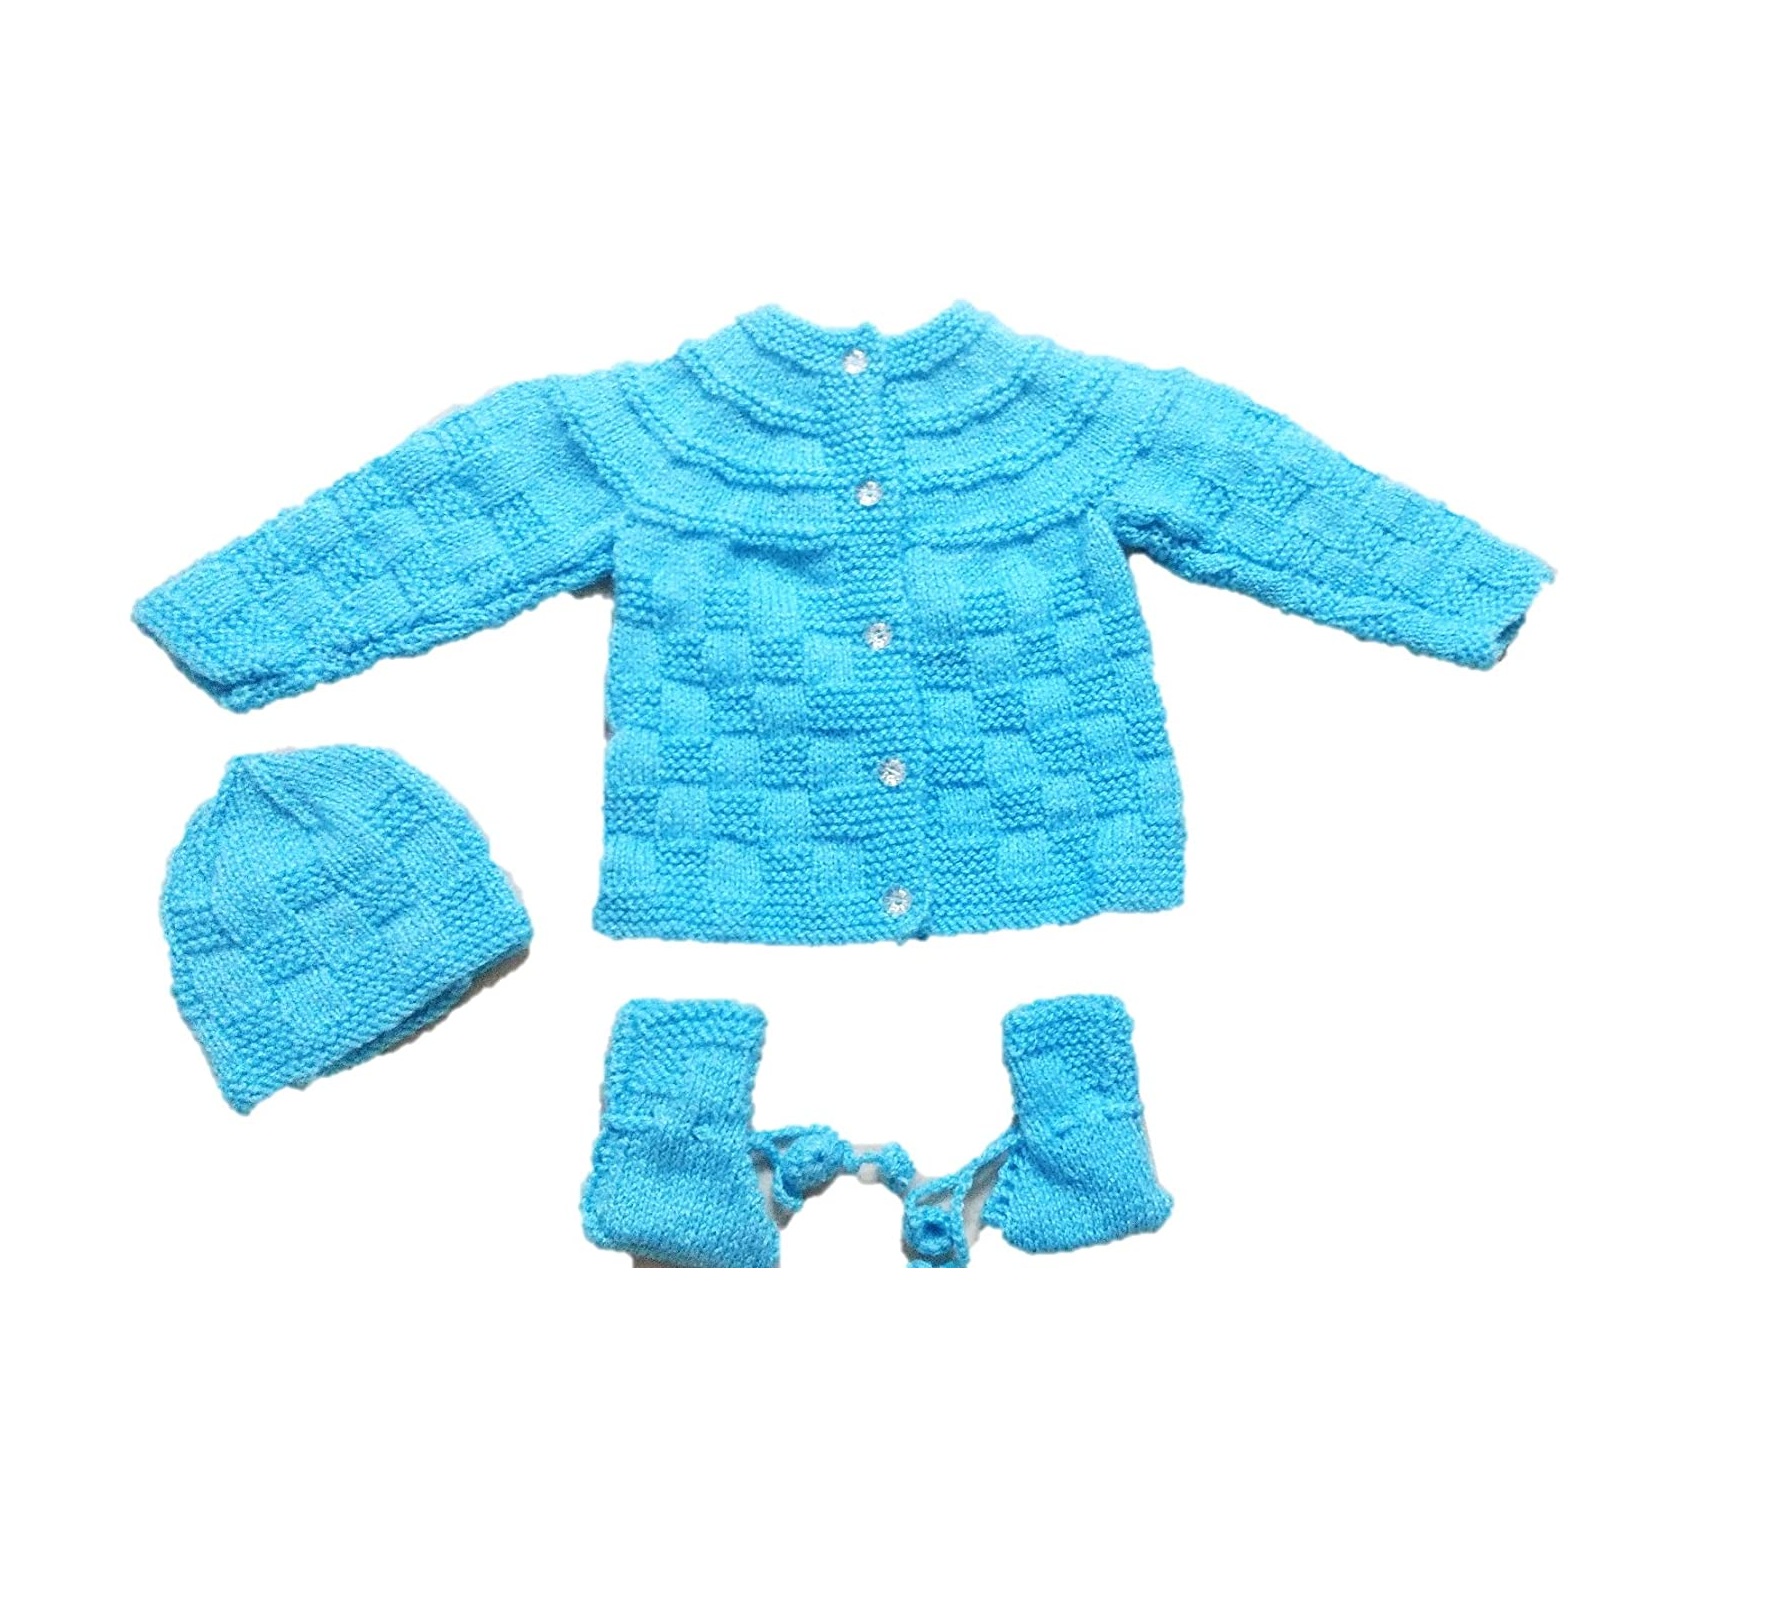 HVM Baby Winter Dress (3-6M, 6-12M, 12-18M, 18-24M, 2-3Y, 3-4Y, 4-5Y, 5-6Y,  6-7Y, 7-8Y, 8-9Y) - Online Shopping Site in India for Kids Clothing I Kids  Footwear I Baby Clothing I Fashion